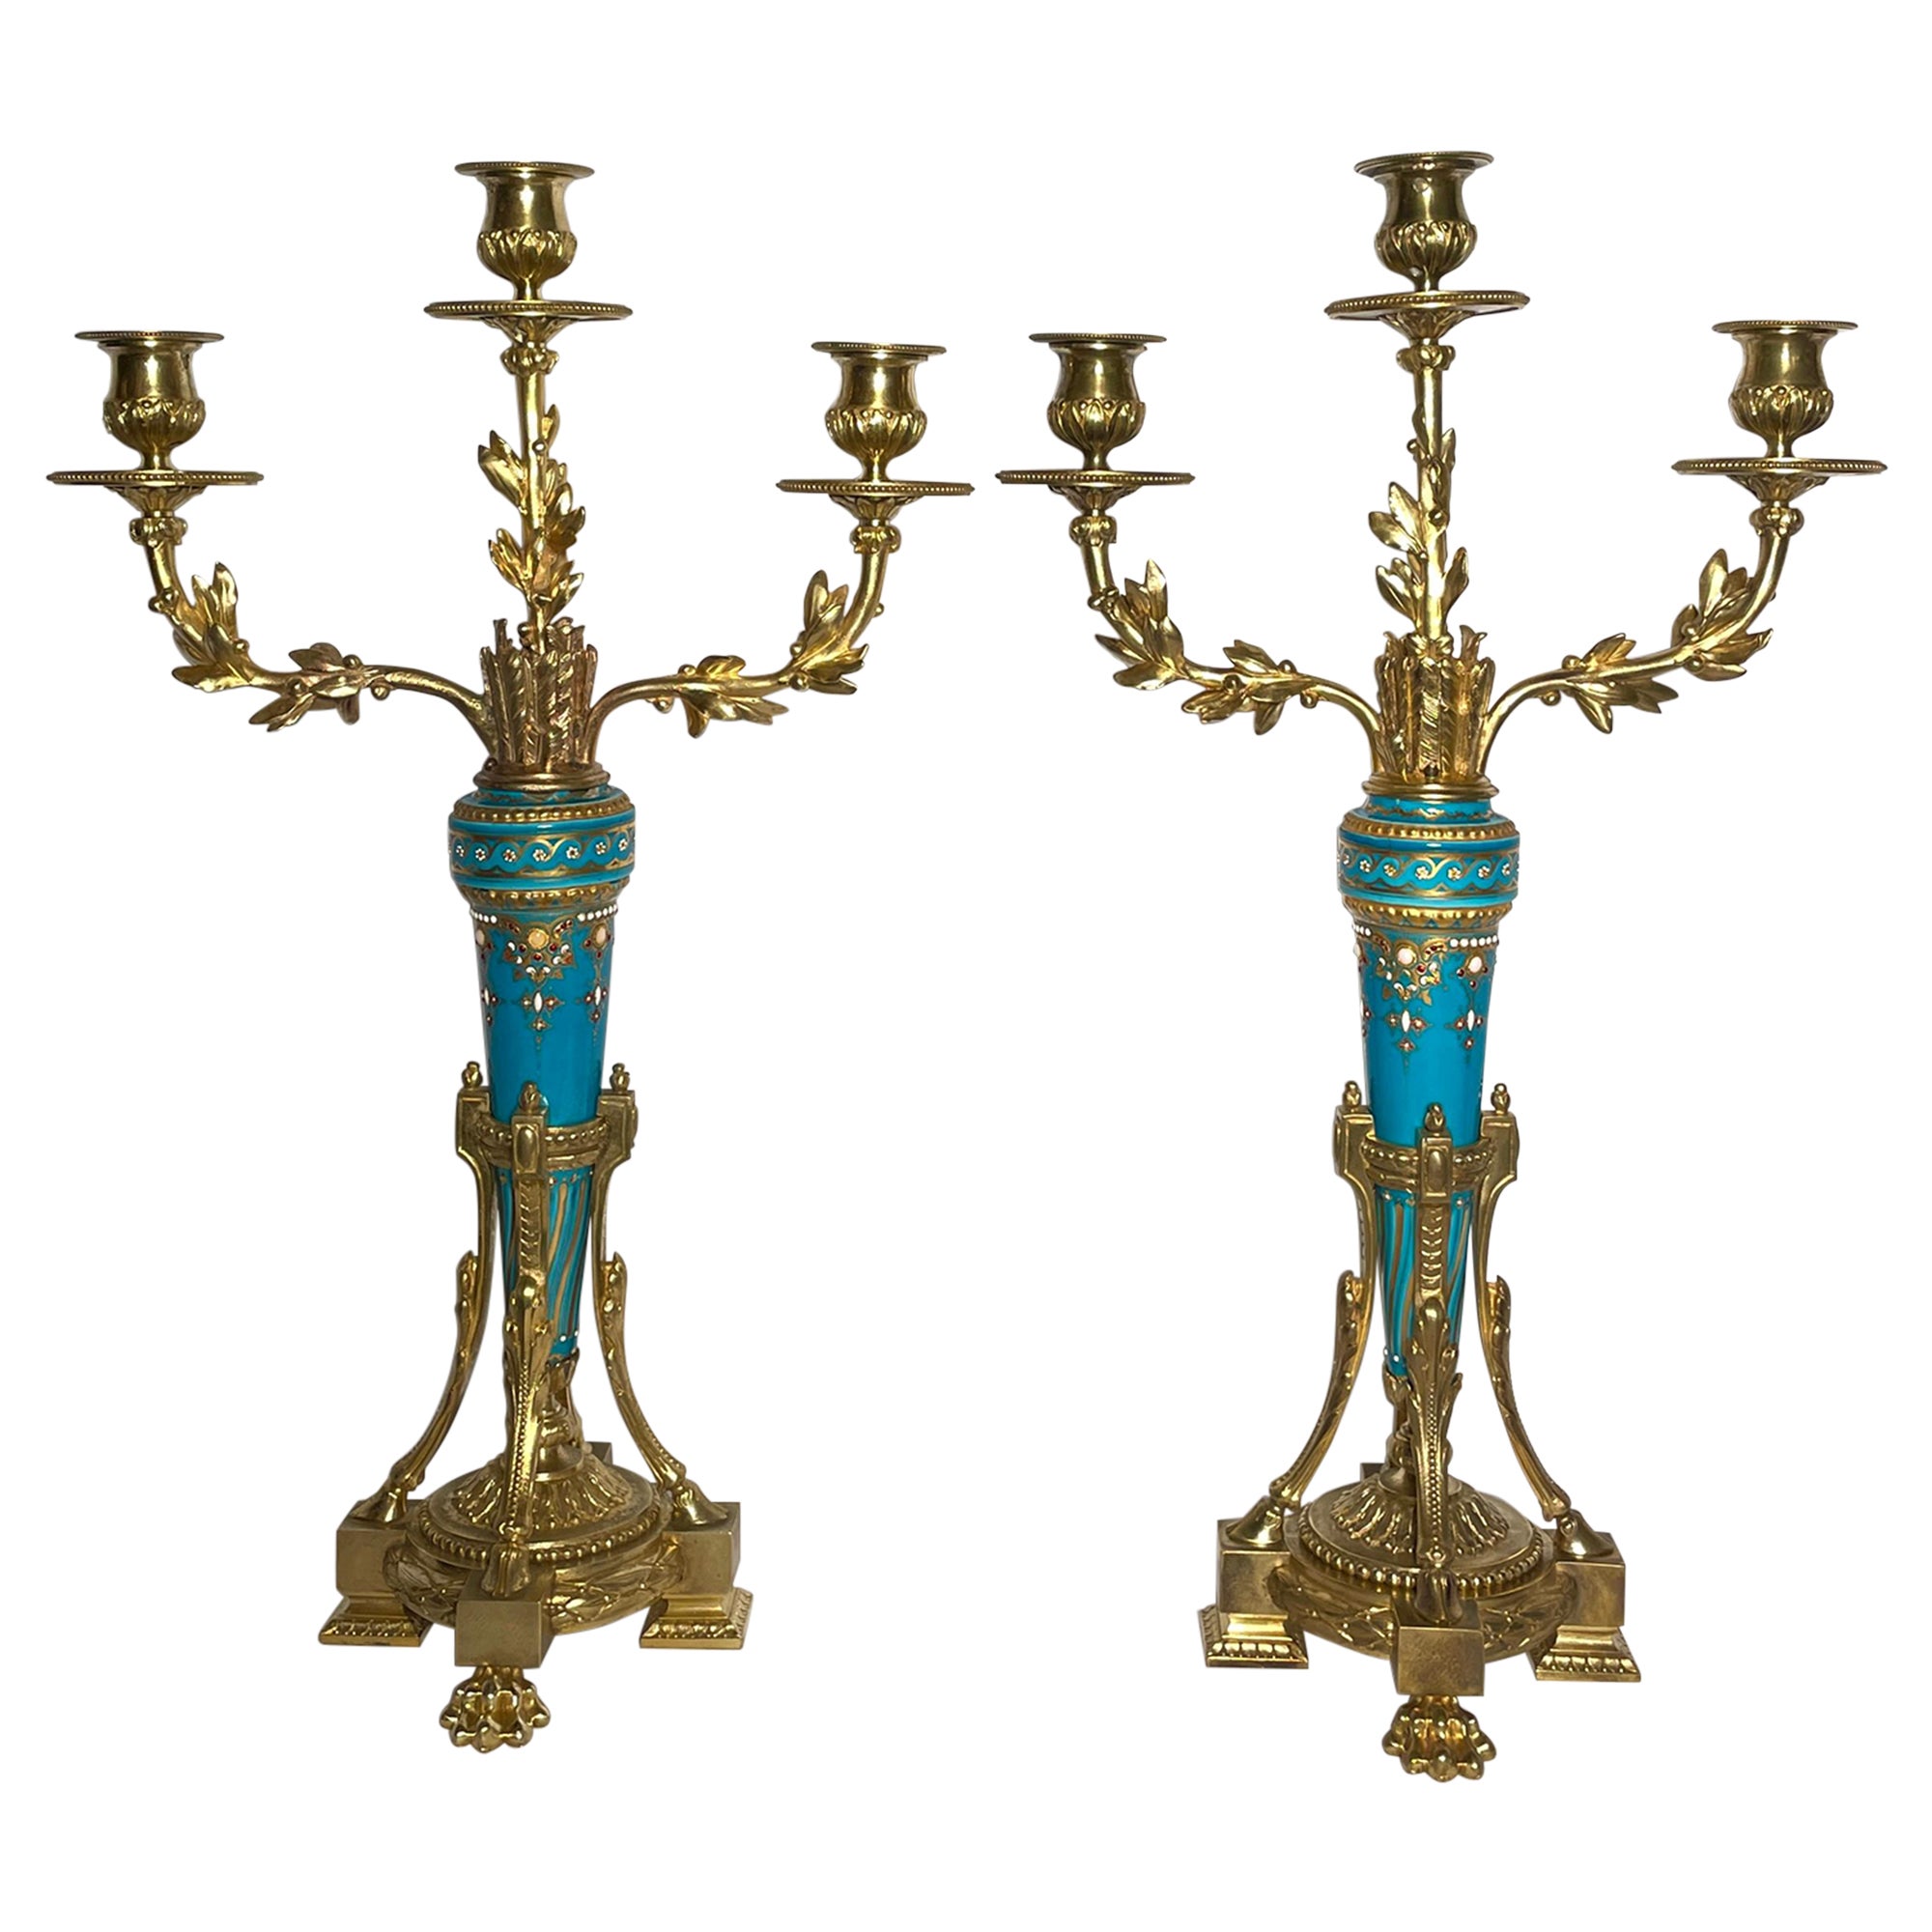 Antique French Ormolu Bronze Candelabra with Jeweled Enamel Porcelain Circa 1870 For Sale